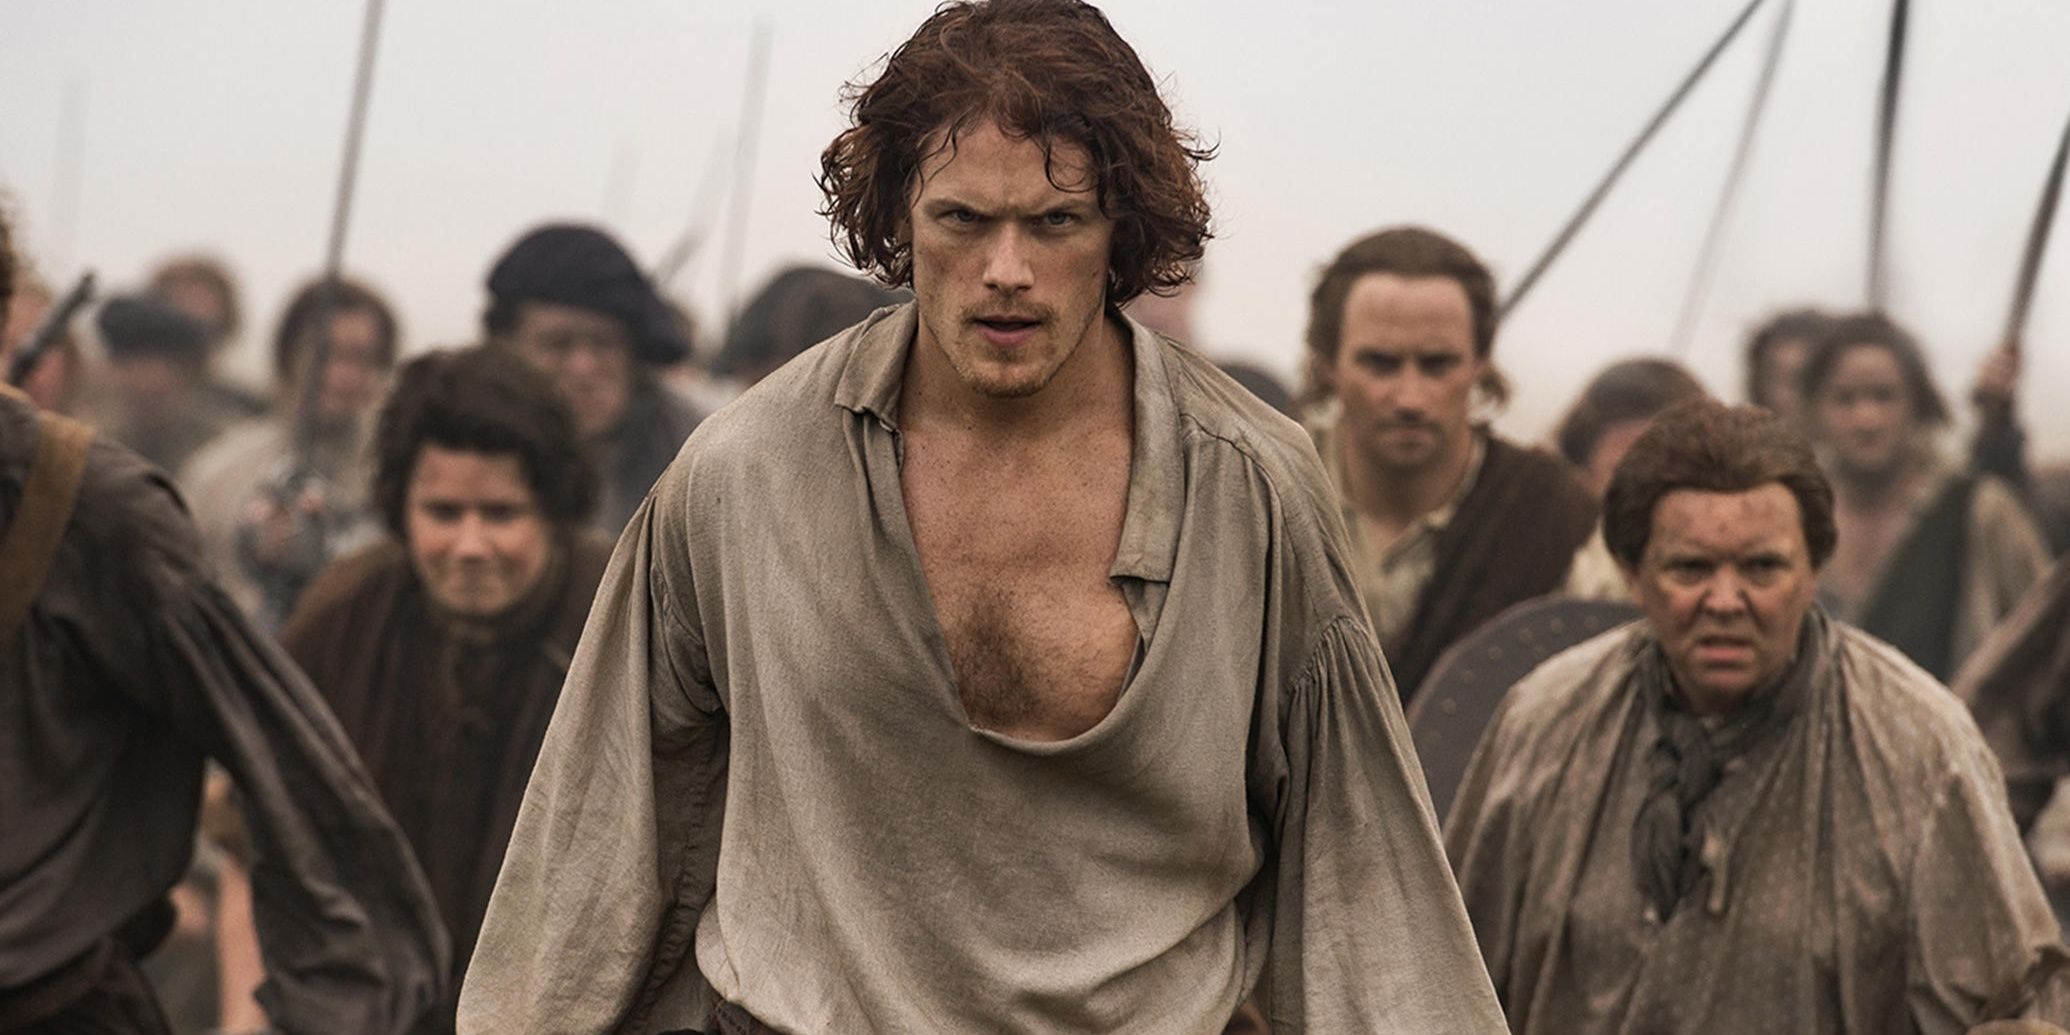 Outlander The Main Characters Ranked From Most Heroic To Most Villainous